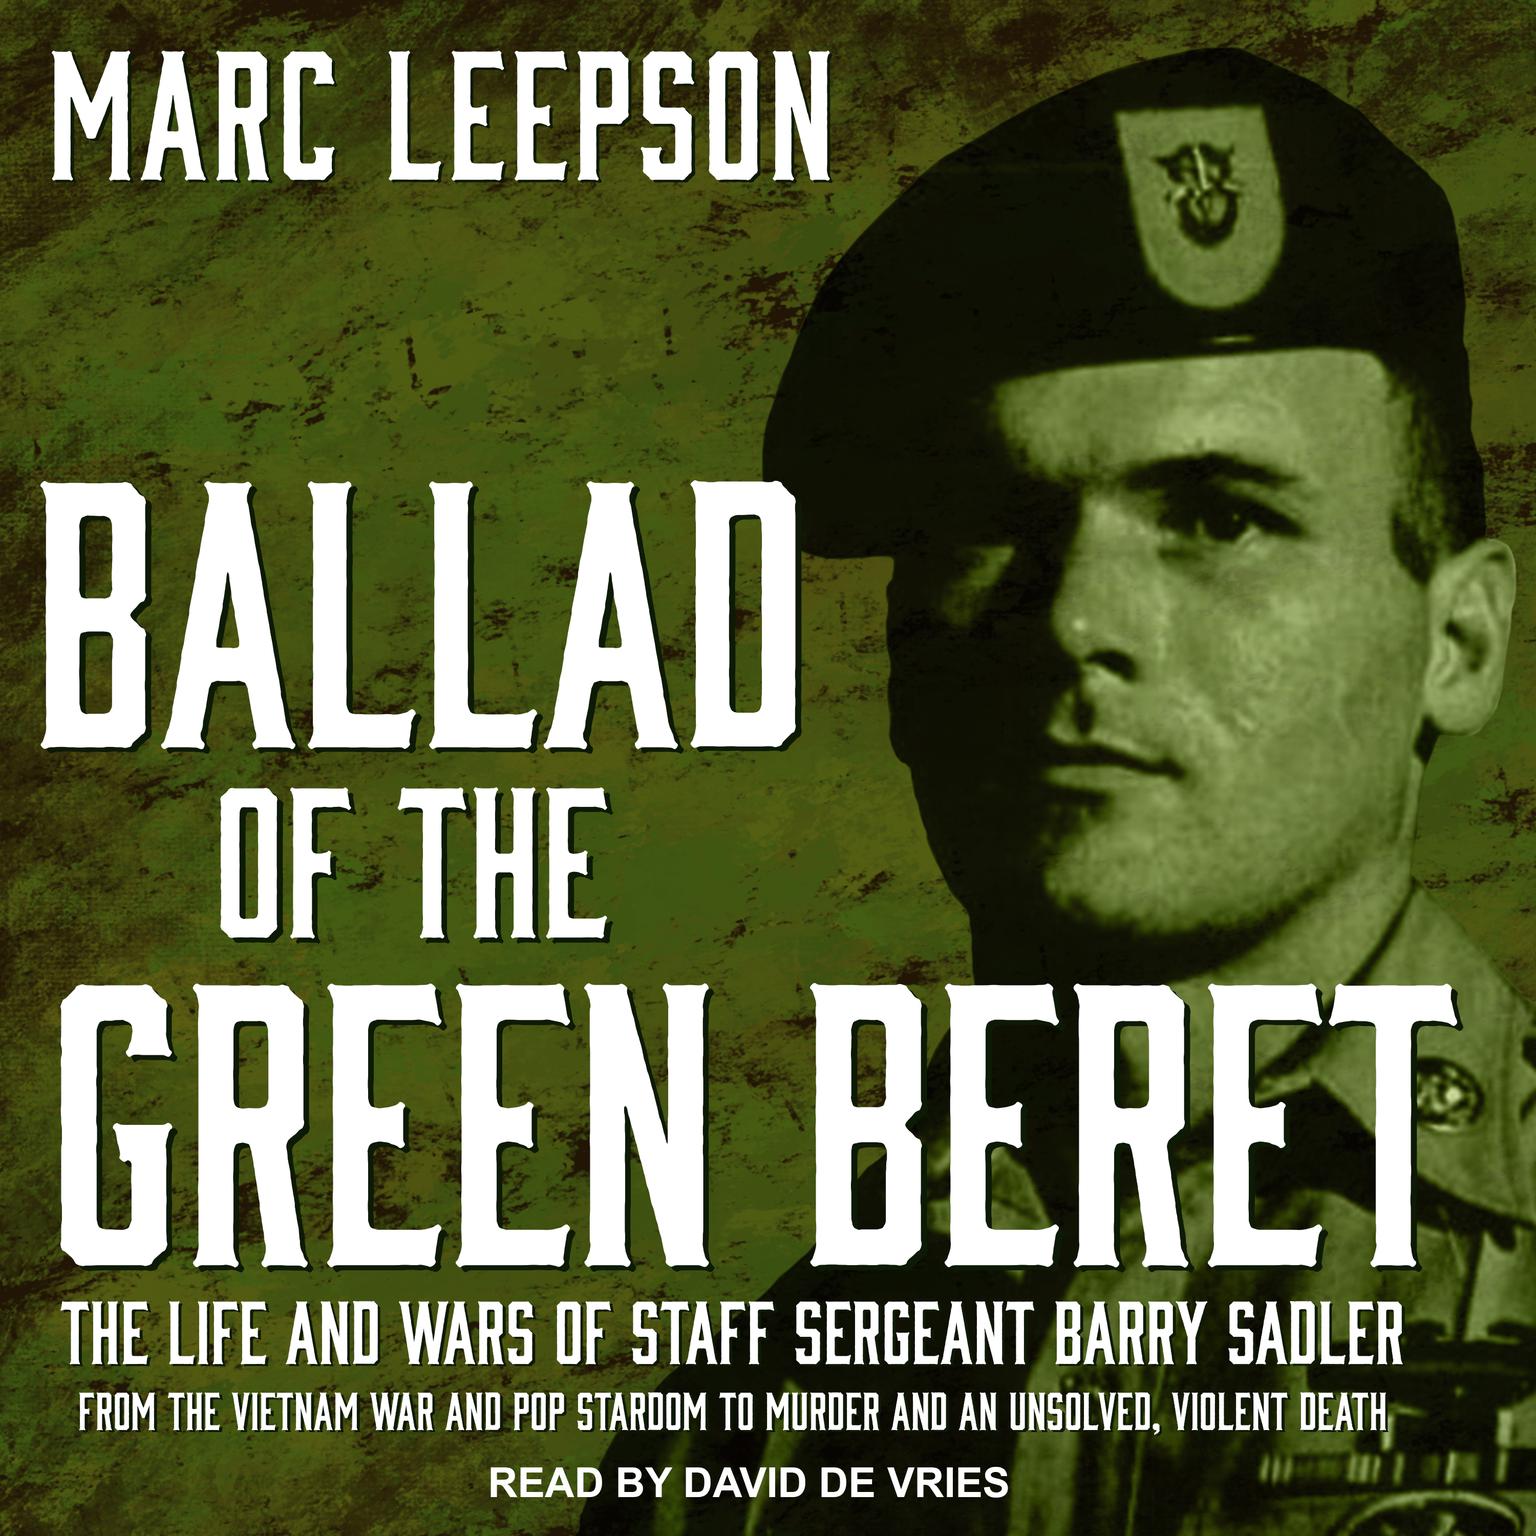 Ballad of the Green Beret: The Life and Wars of Staff Sergeant Barry Sadler from the Vietnam War and Pop Stardom to Murder and an Unsolved, Violent Death Audiobook, by Marc Leepson